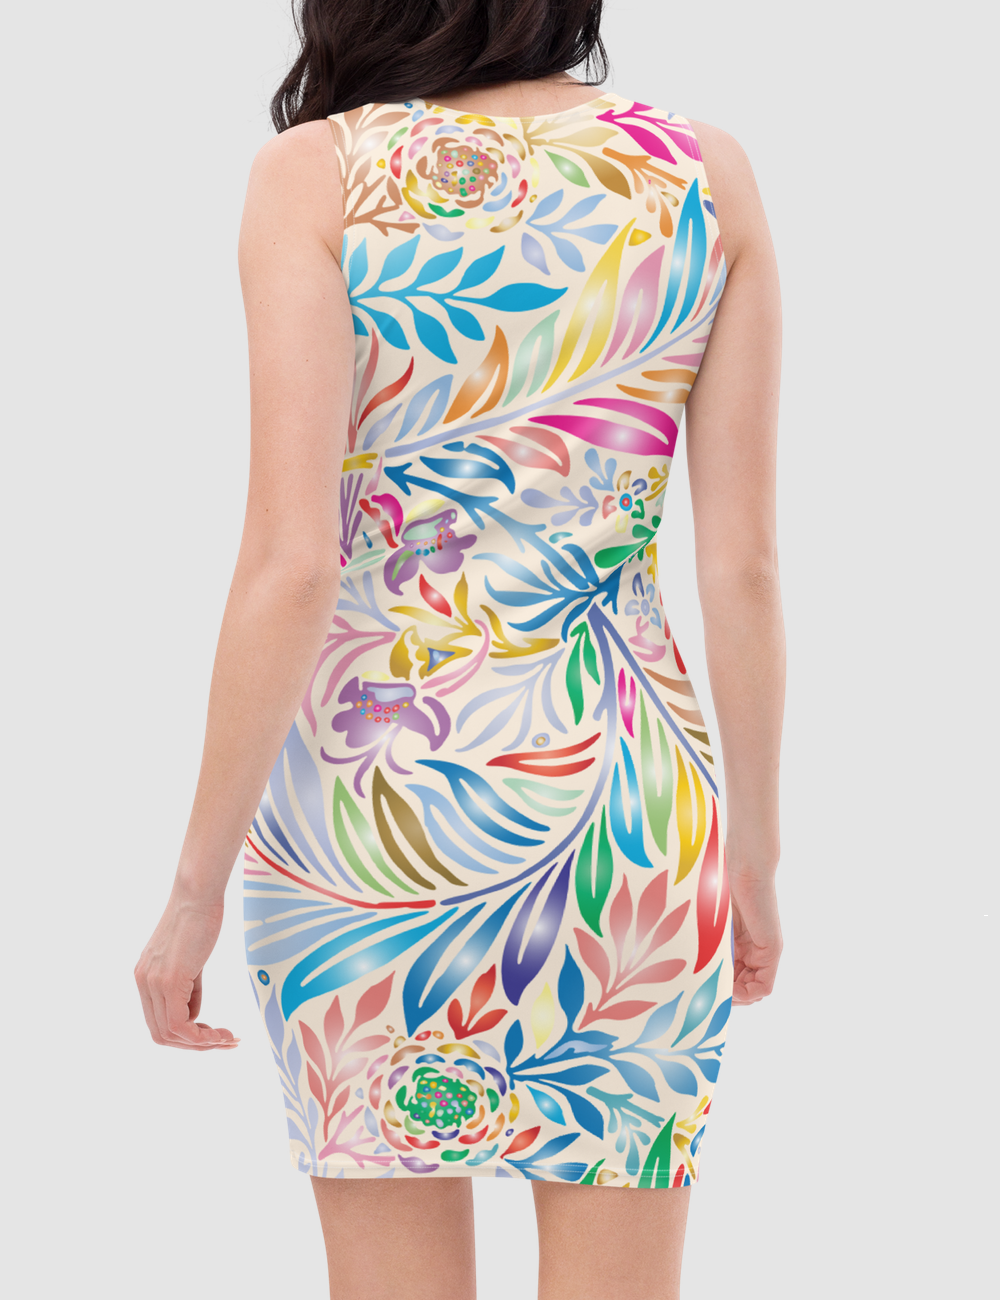 Vintage Hawaiian Floral Colors | Women's Sleeveless Fitted Sublimated Dress OniTakai